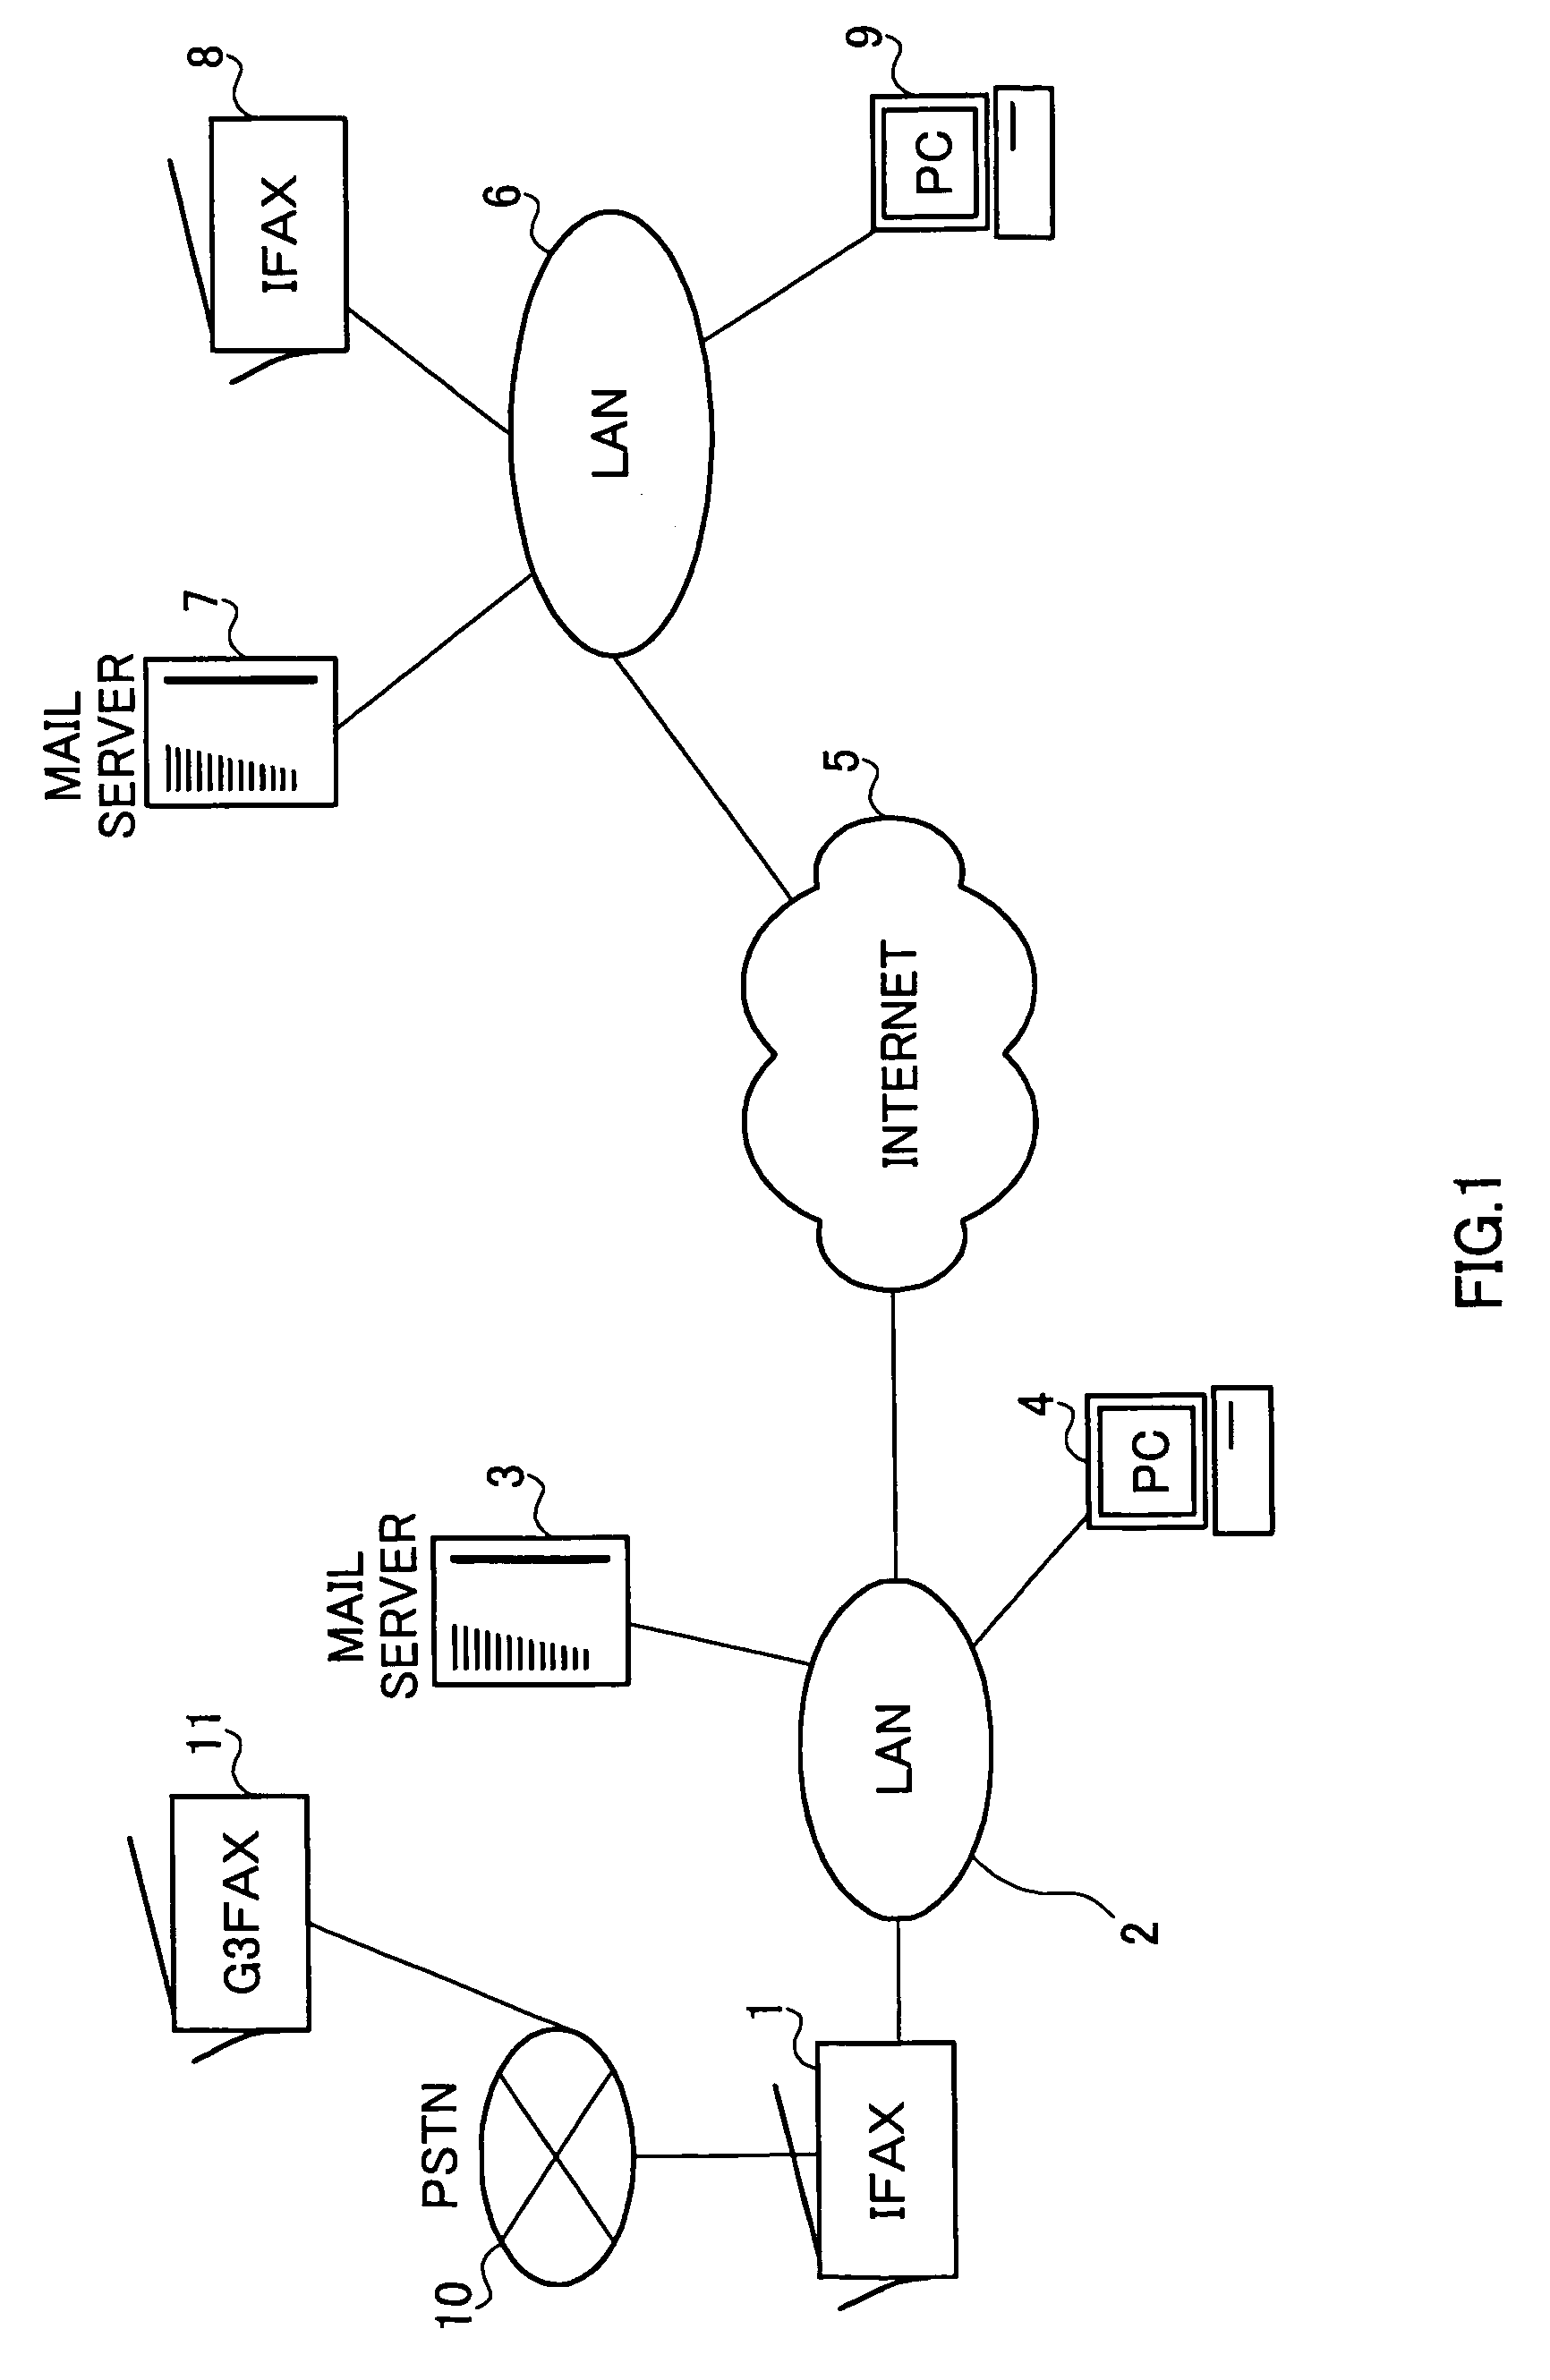 Apparatus and method for receiving image